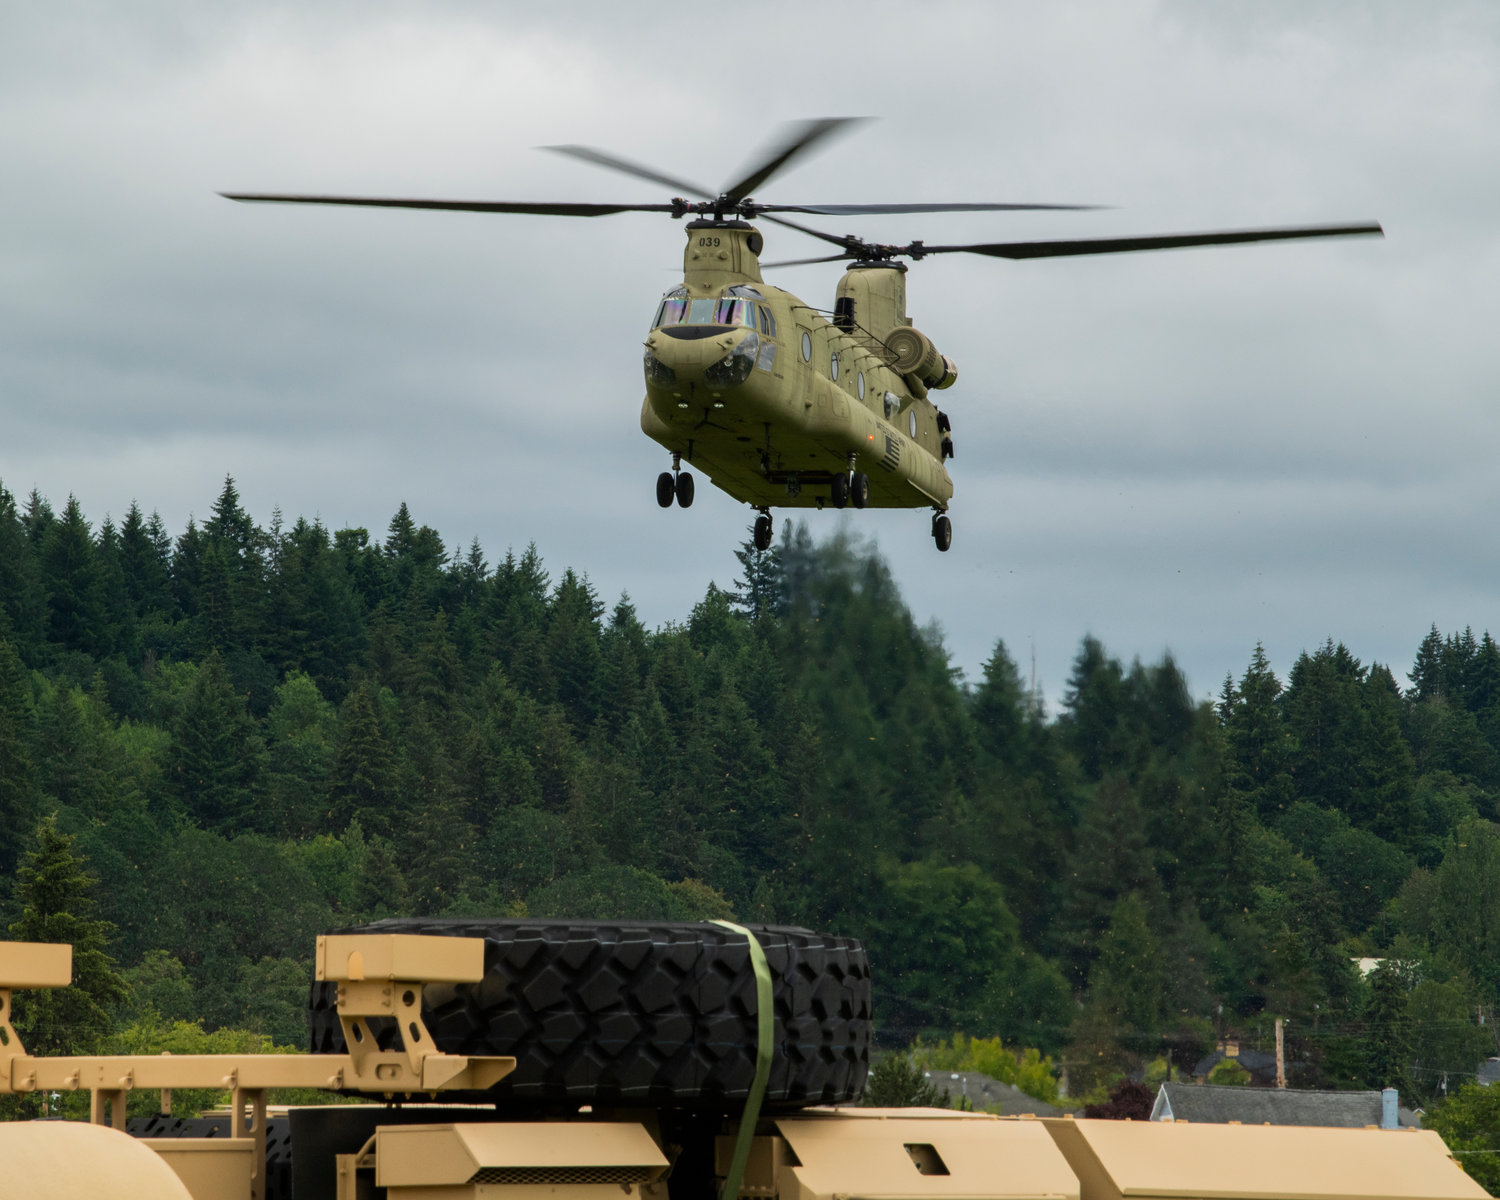 A Chinook helicopter prepares to land at the Chehalis-Centralia Airport during a military training exercise on Wednesday.